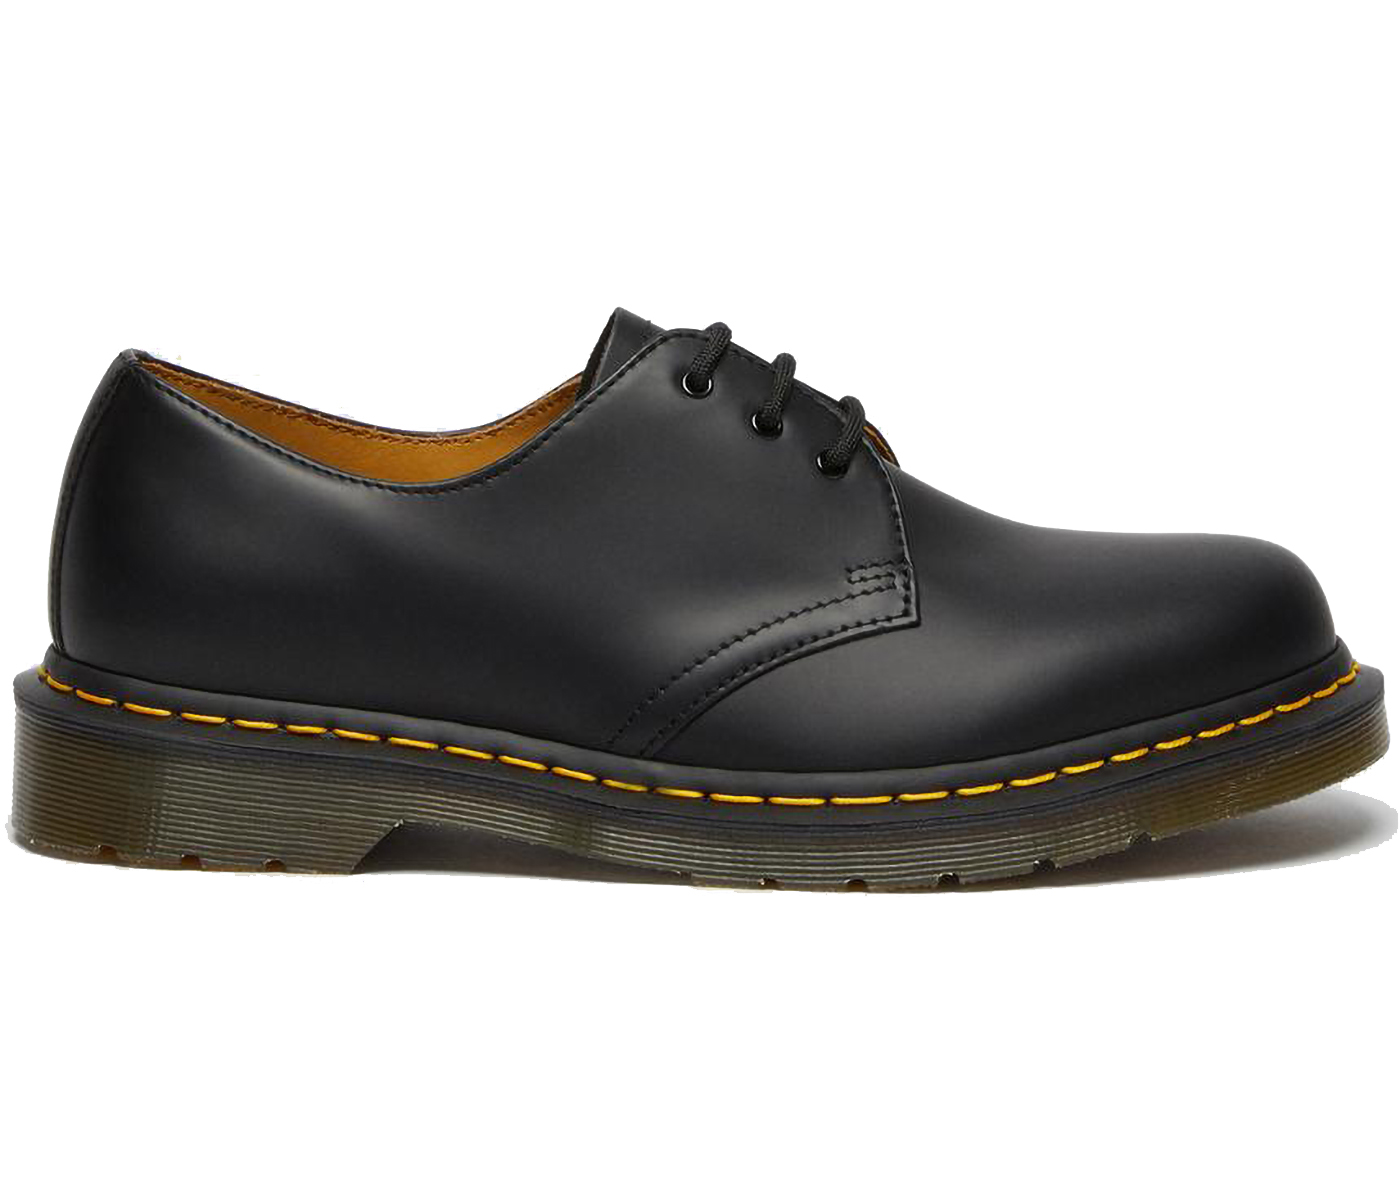 Dr. Martens 1461 Smooth Leather Oxford Black Smooth - 11838002 - US